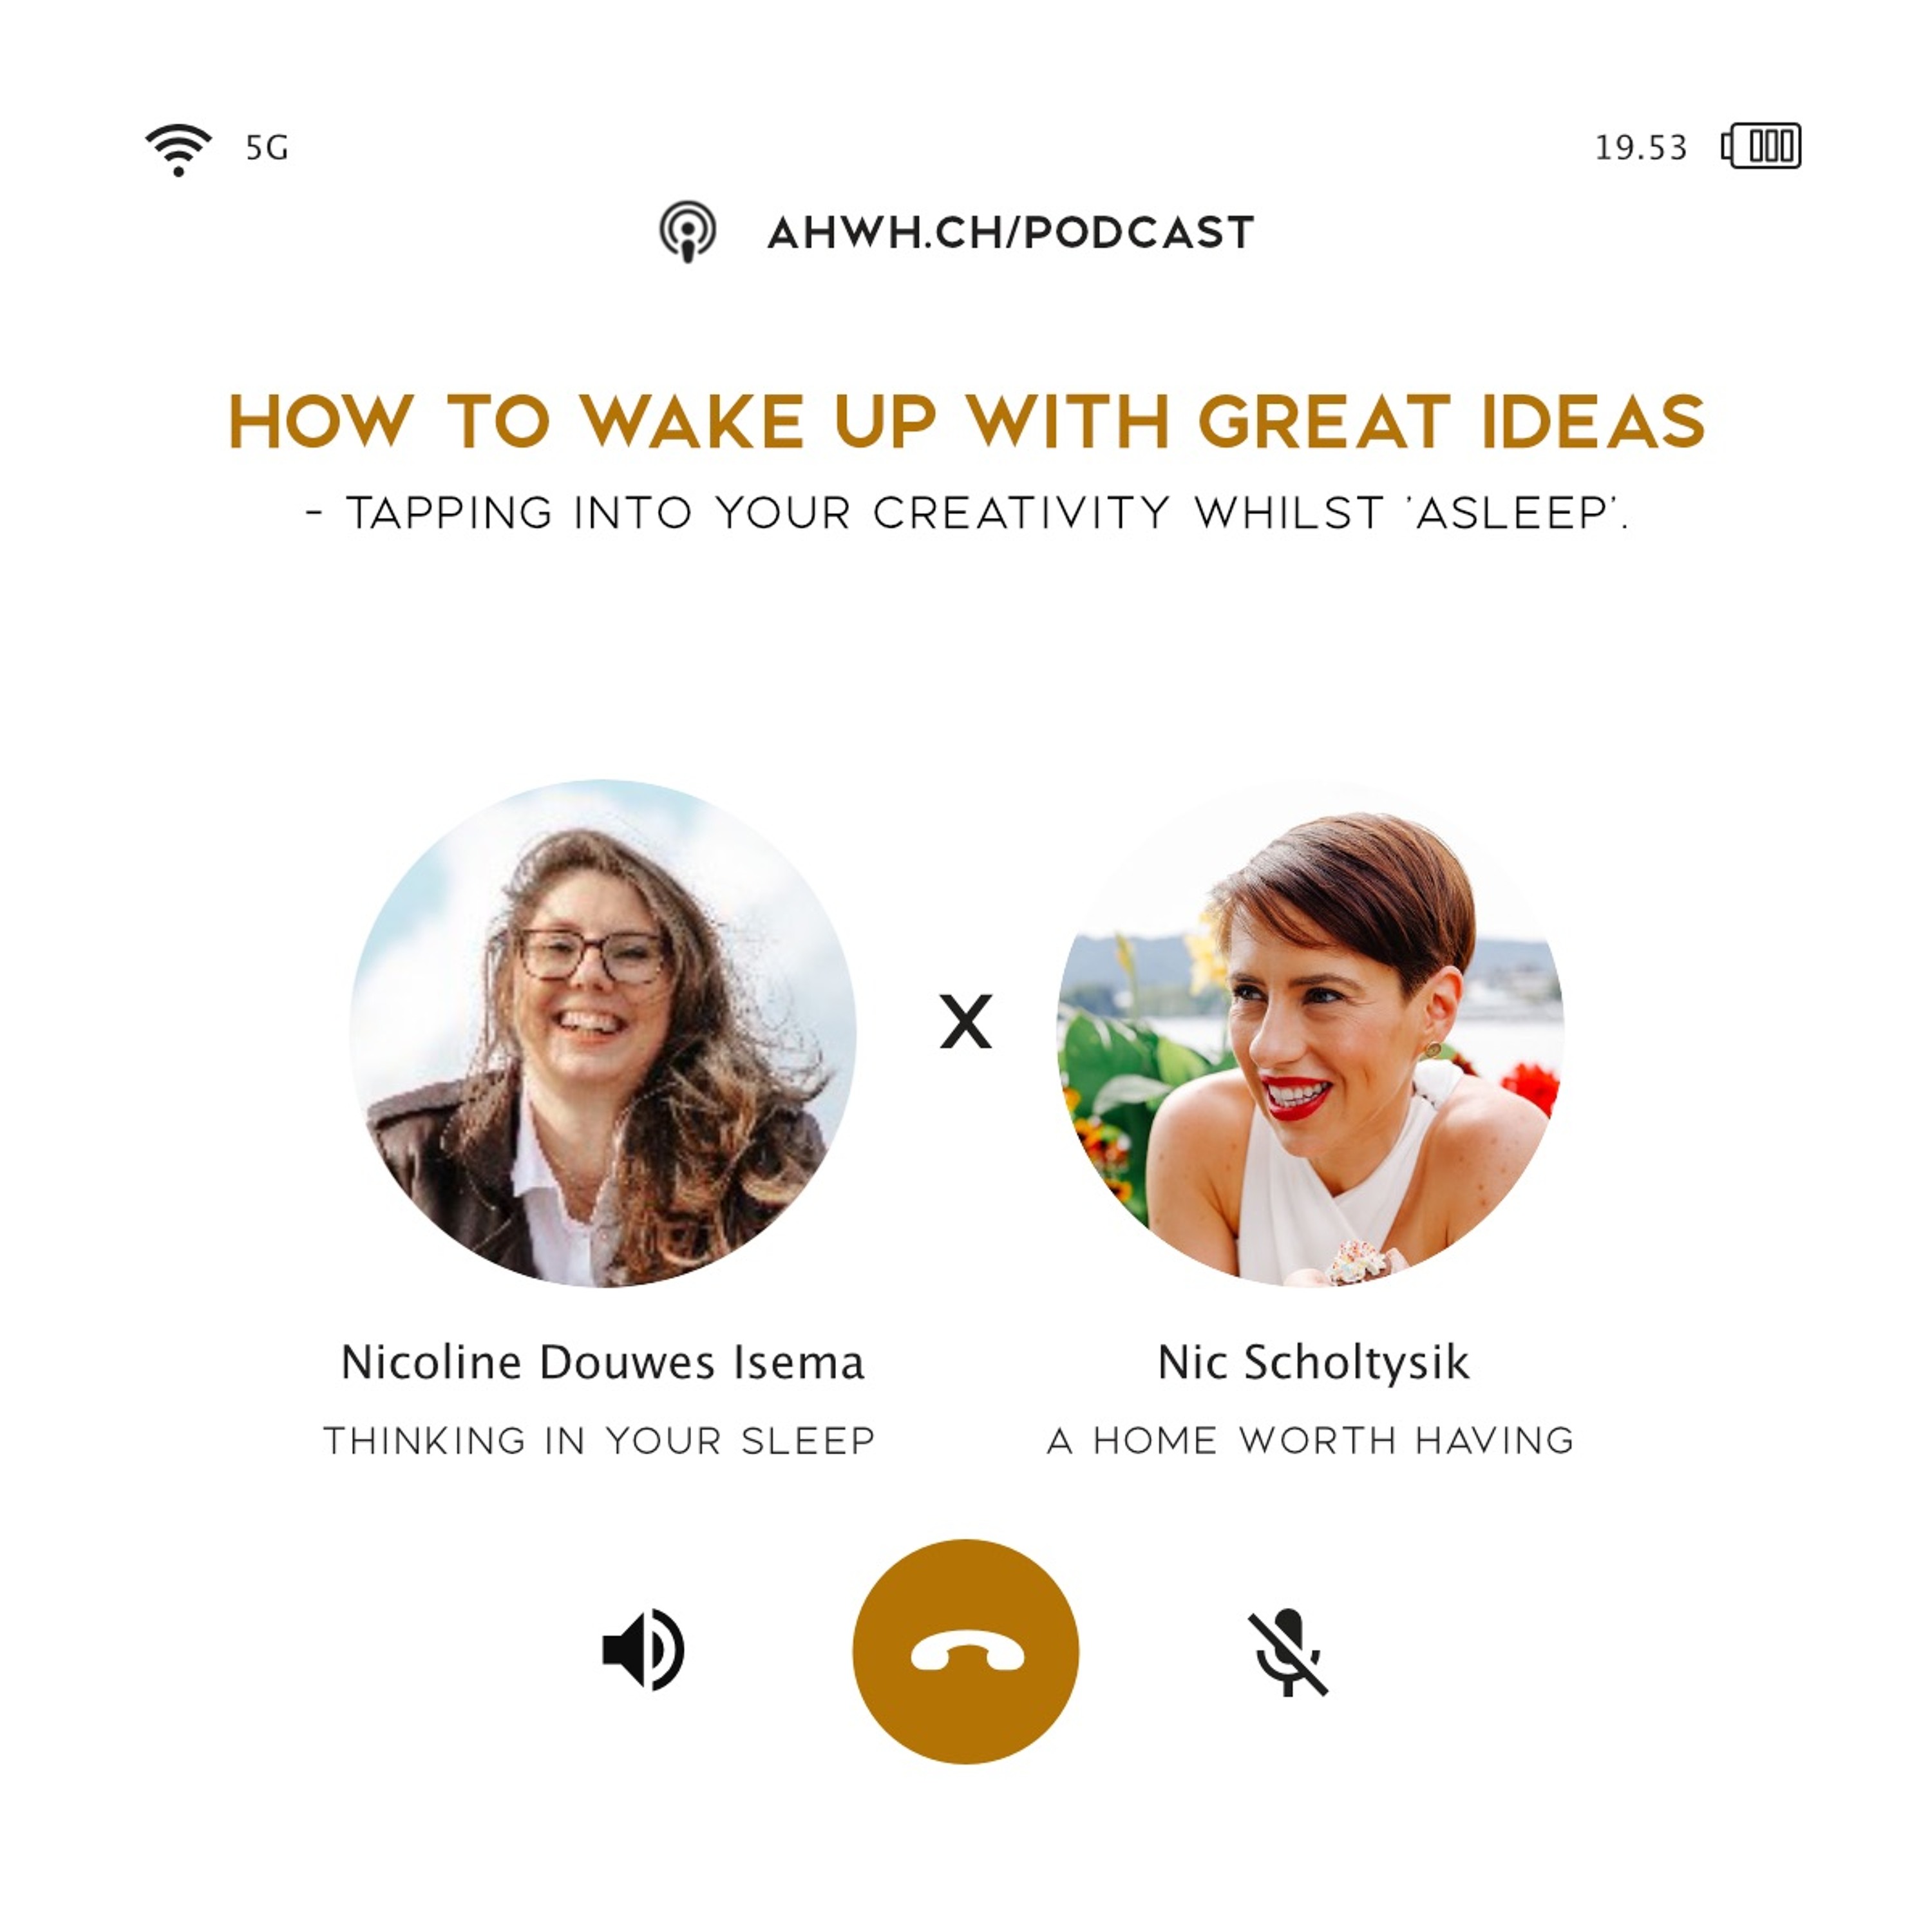 How to wake up with great ideas - leveraging your creativity when you can't find inspiration first.